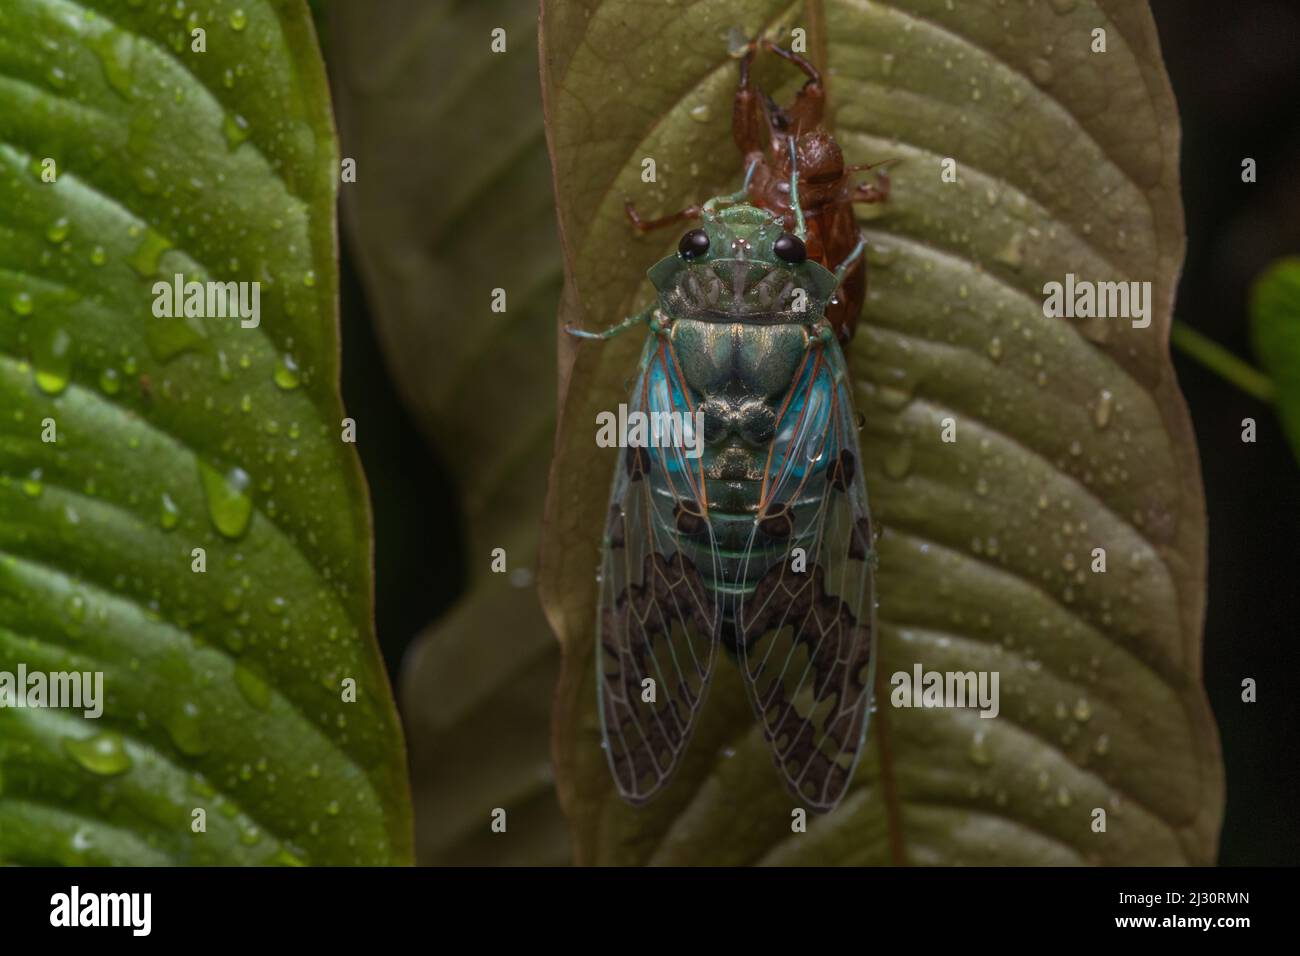 Under cover of night, a cicada sheds its old exoskeleton and starts its adult life in the rainforest. Stock Photo